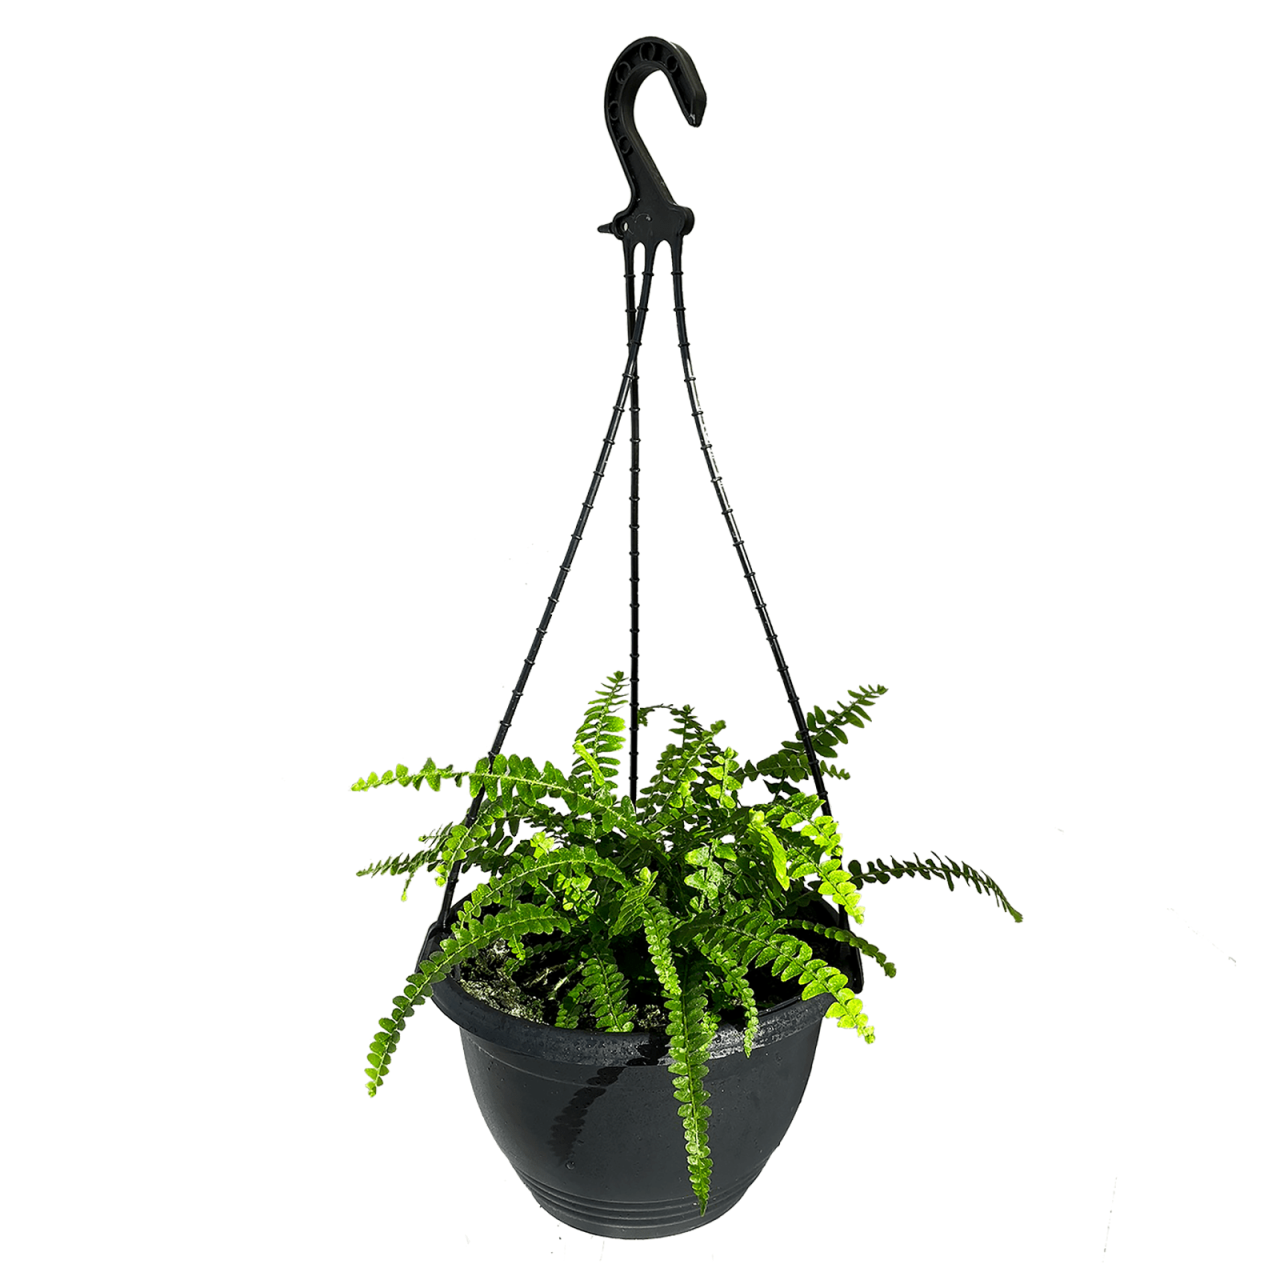 Hanging Plants Indoor | Hanging Fern Bunnings: A Comprehensive Guide to Varieties, Care, and Styling